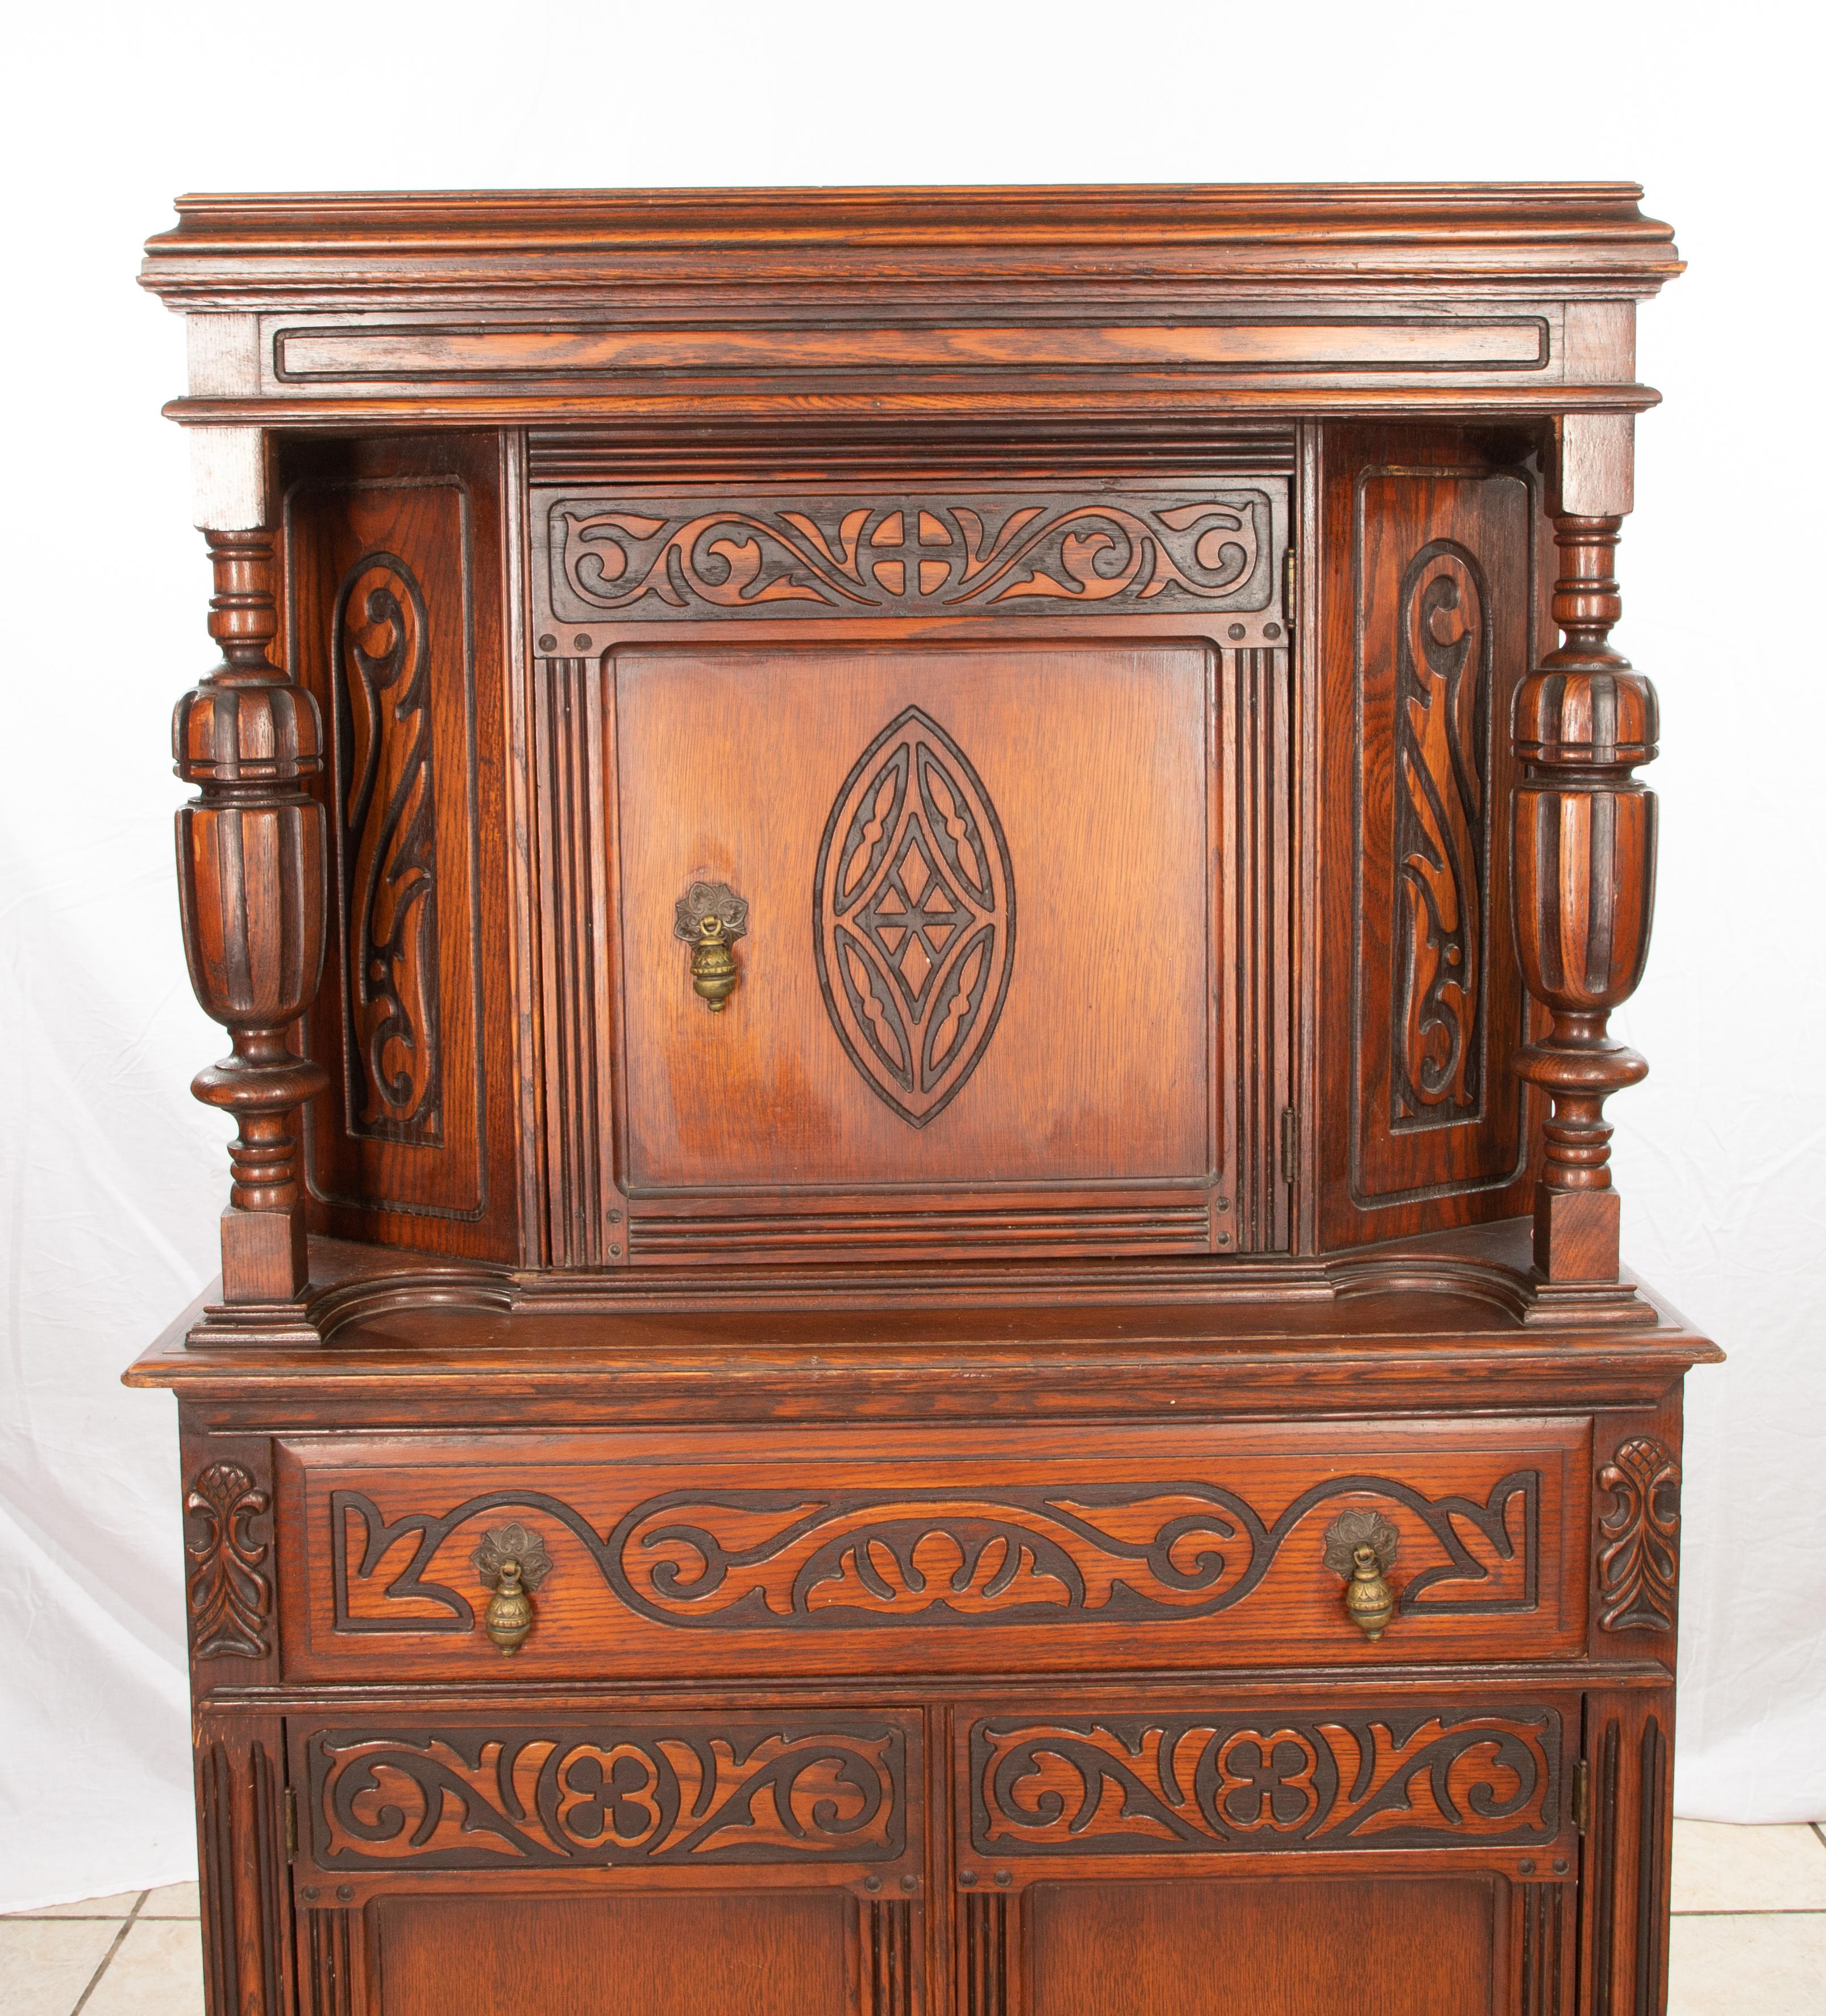 Hand-Crafted Jacobean Revival Court Cupboard For Sale